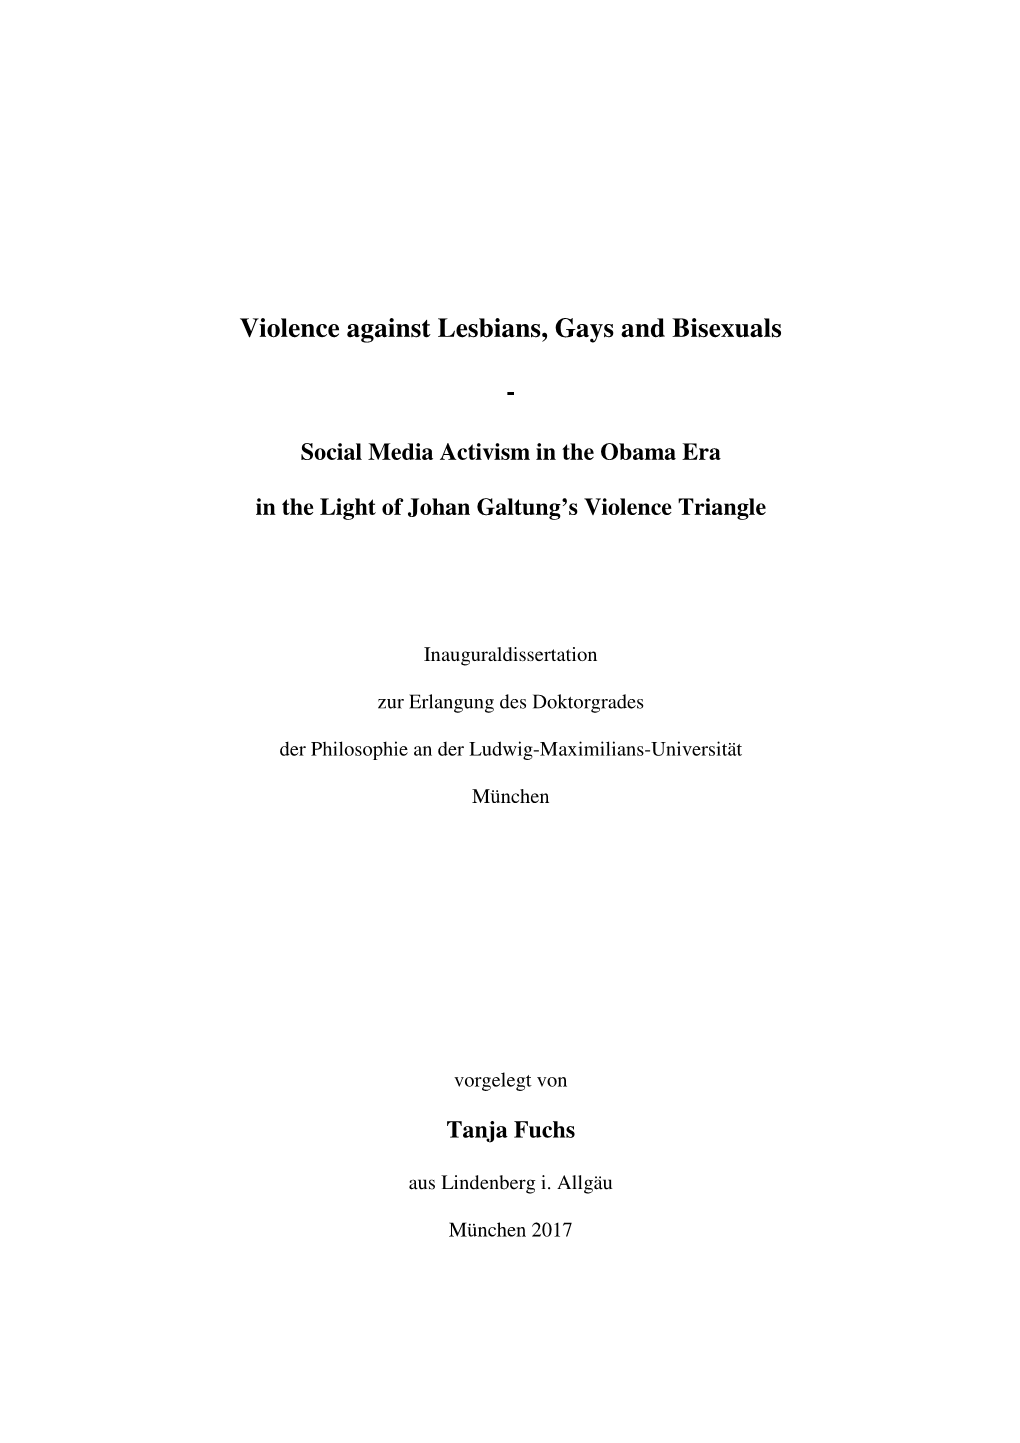 Violence Against Lesbians, Gays and Bisexuals